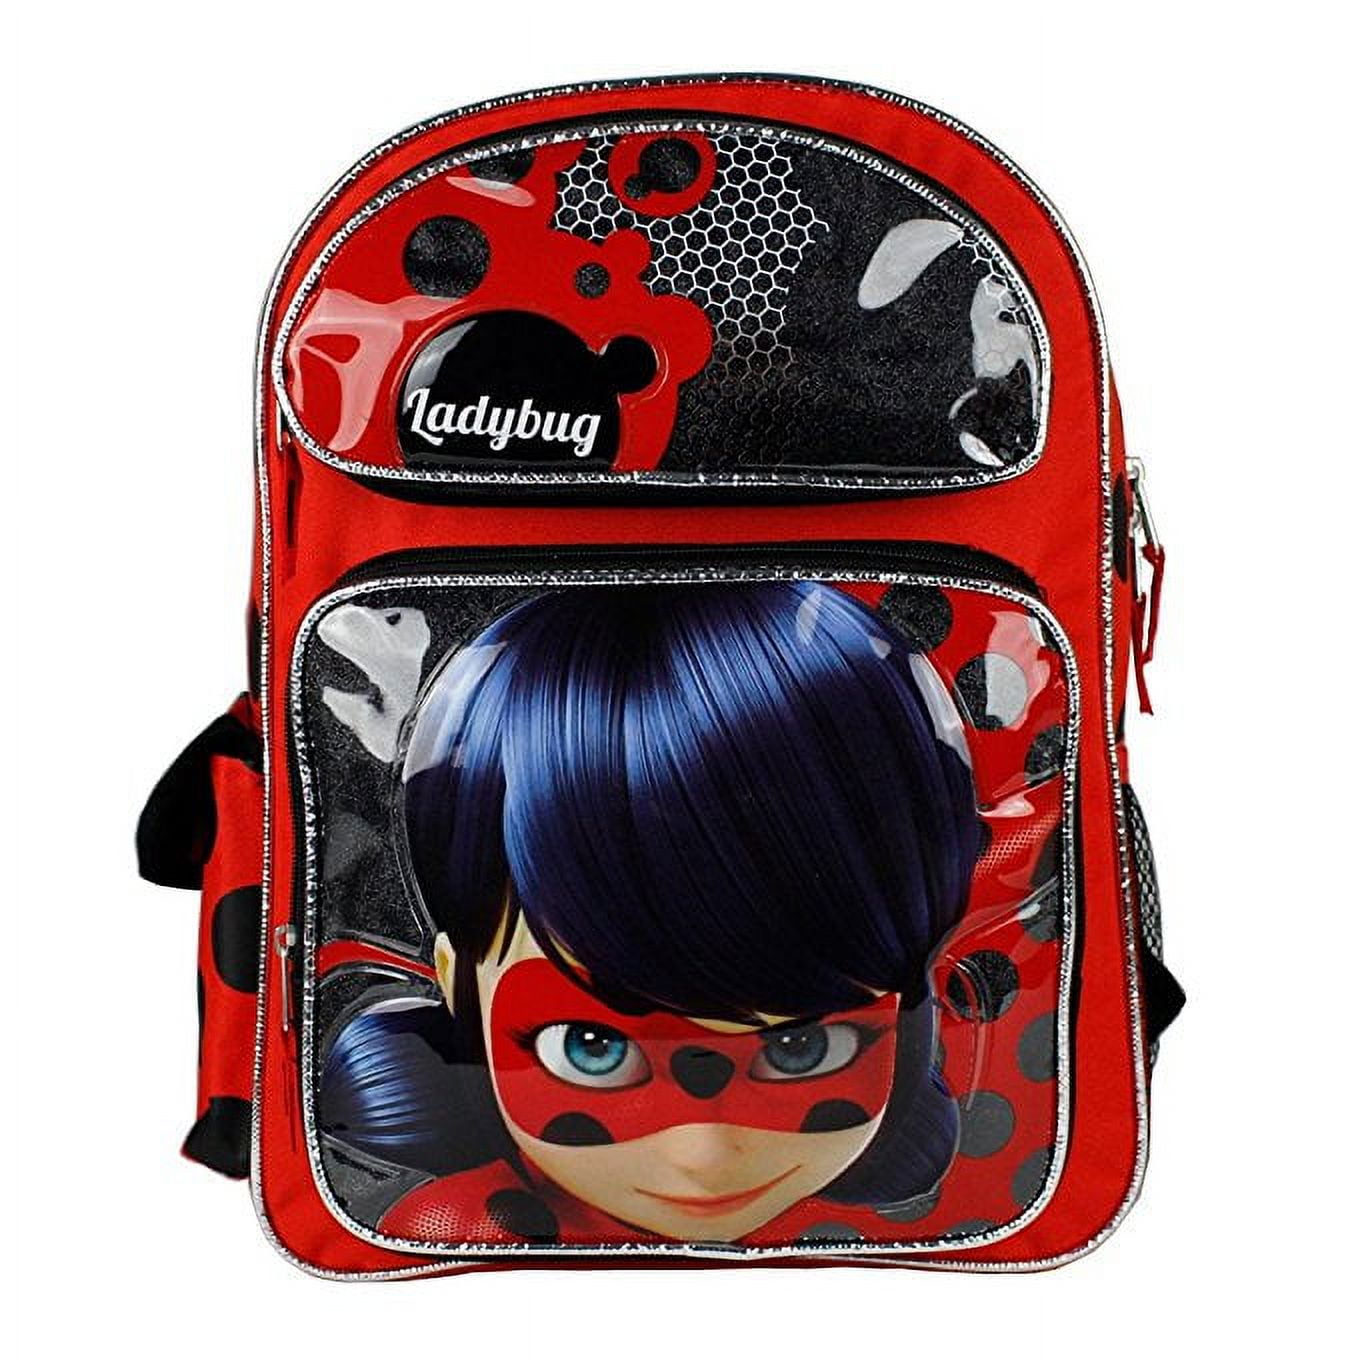 Miraculous Ladybug Cat Noir Backpack for Girls and Boys, 16 inch, Black